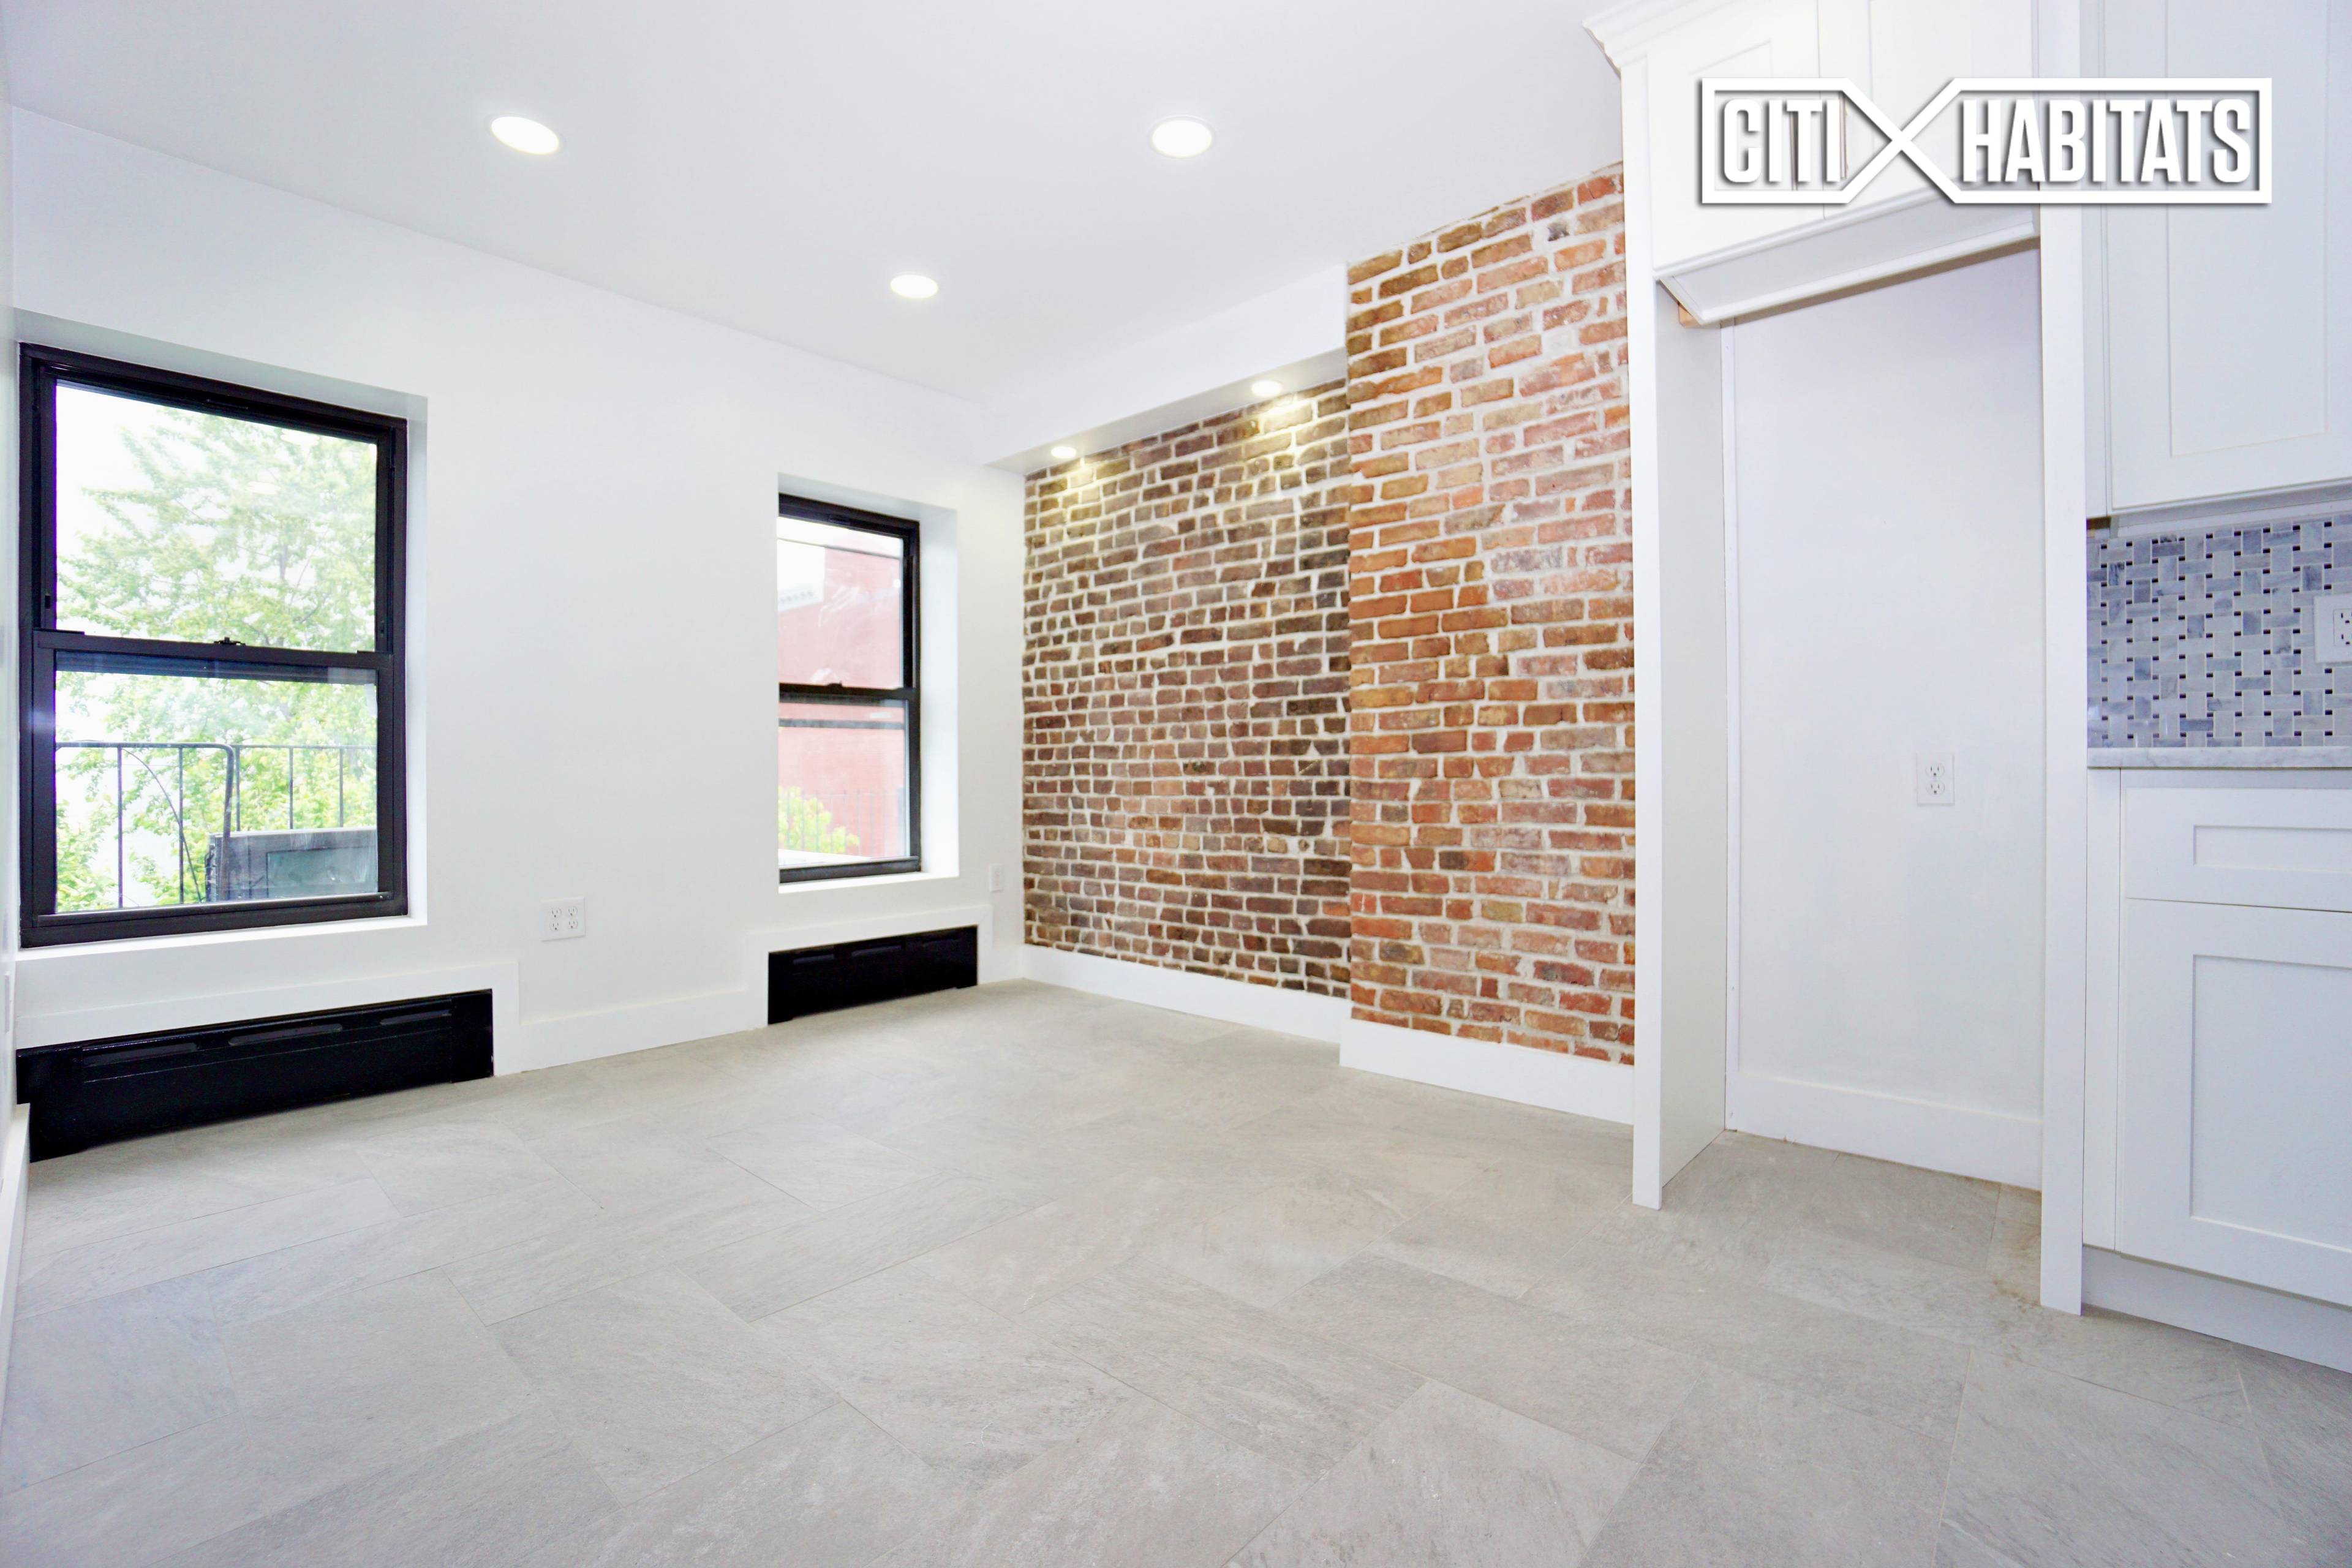 No Fee ! Brand new 1 Bedroom apartment with huge garden area right off the J train Kosciuszko Spacious living and bedroom with separate kitchen and bathroom, brick wall, large ...